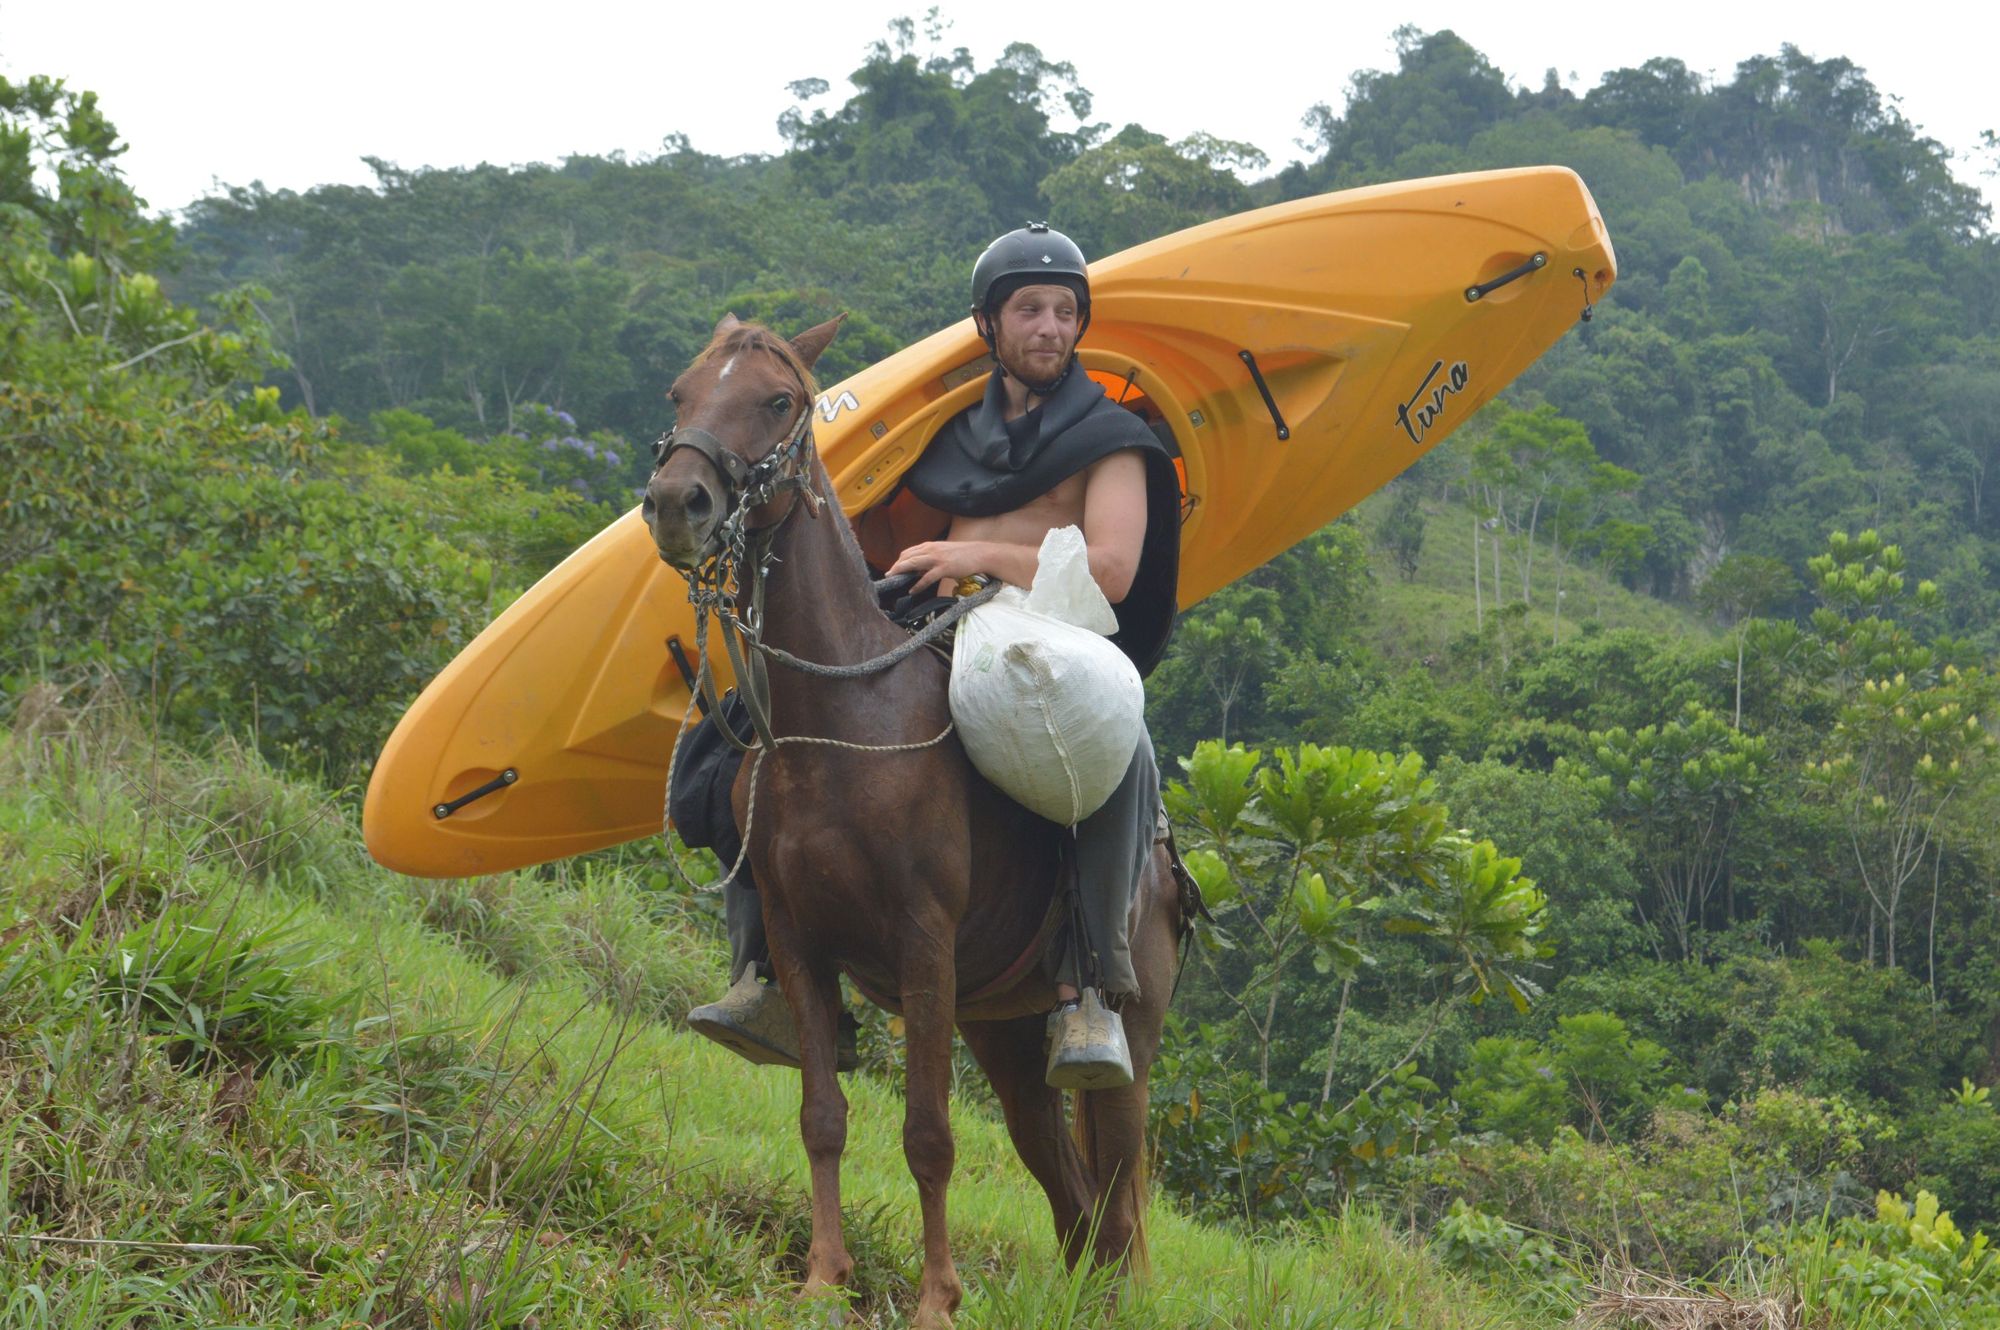 French hydrologist and guide Jules Domine, transporting a kayak while on horseback.